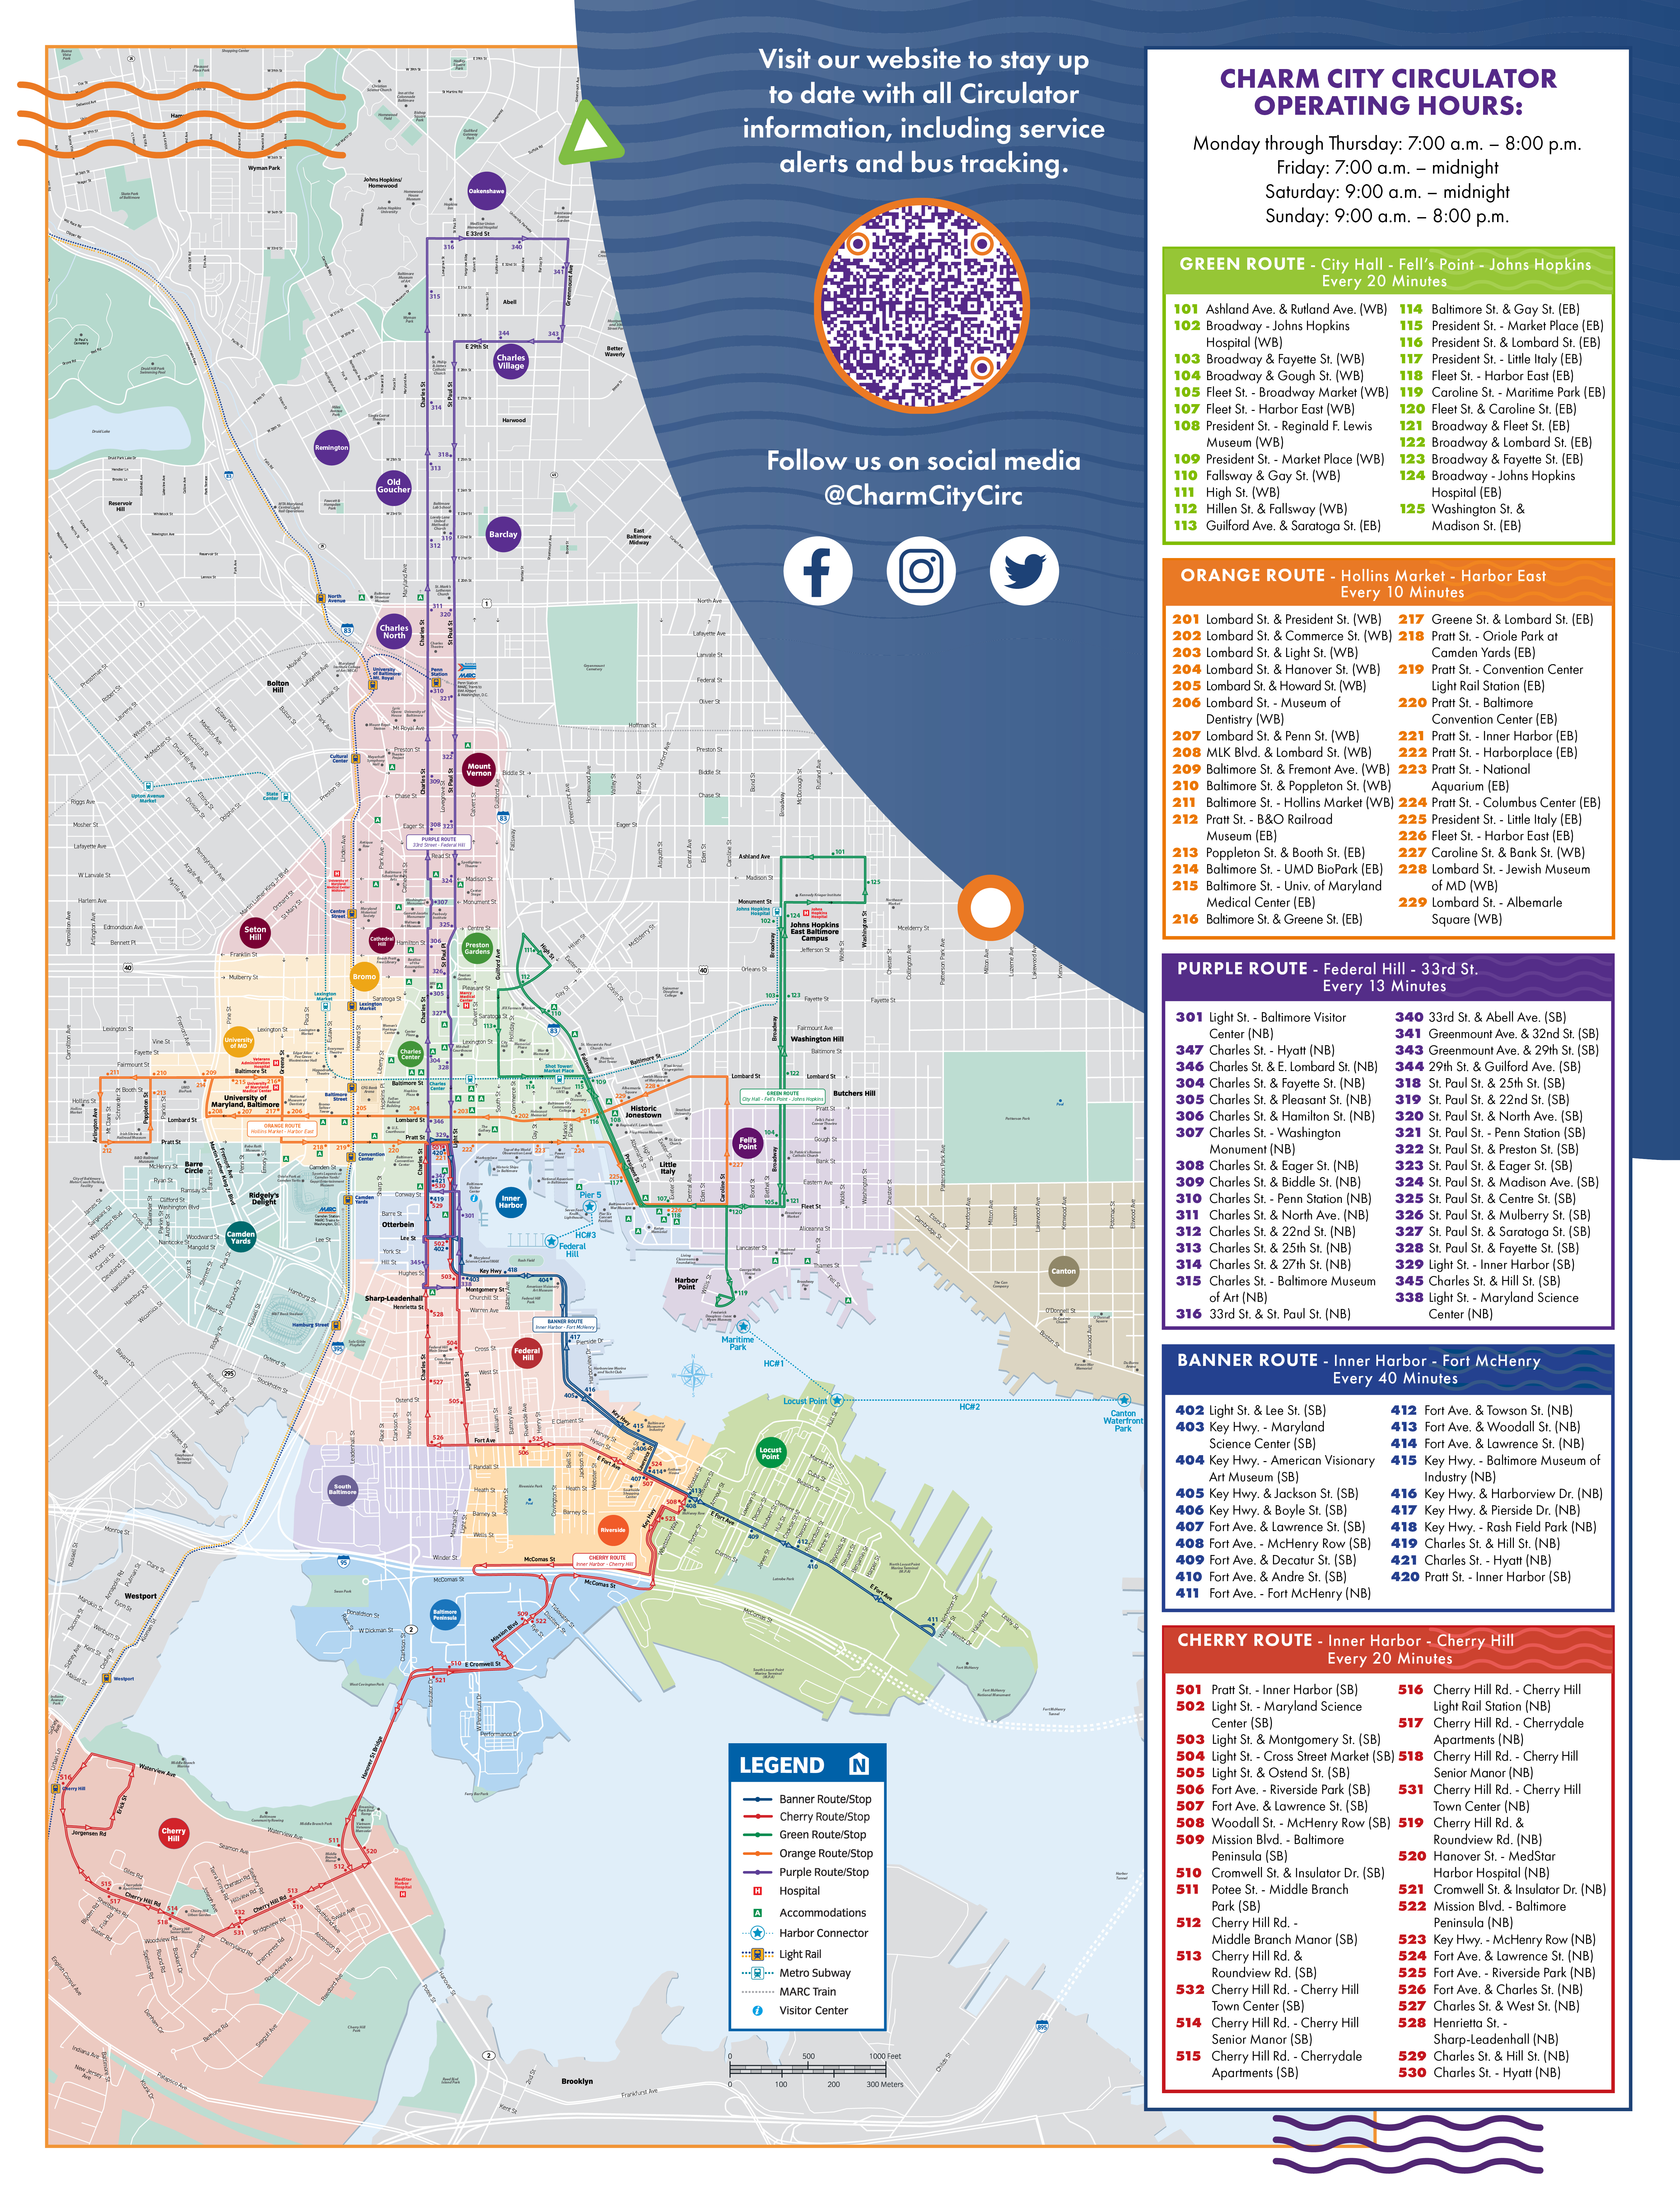 Map of Charm City Circulator bus routes